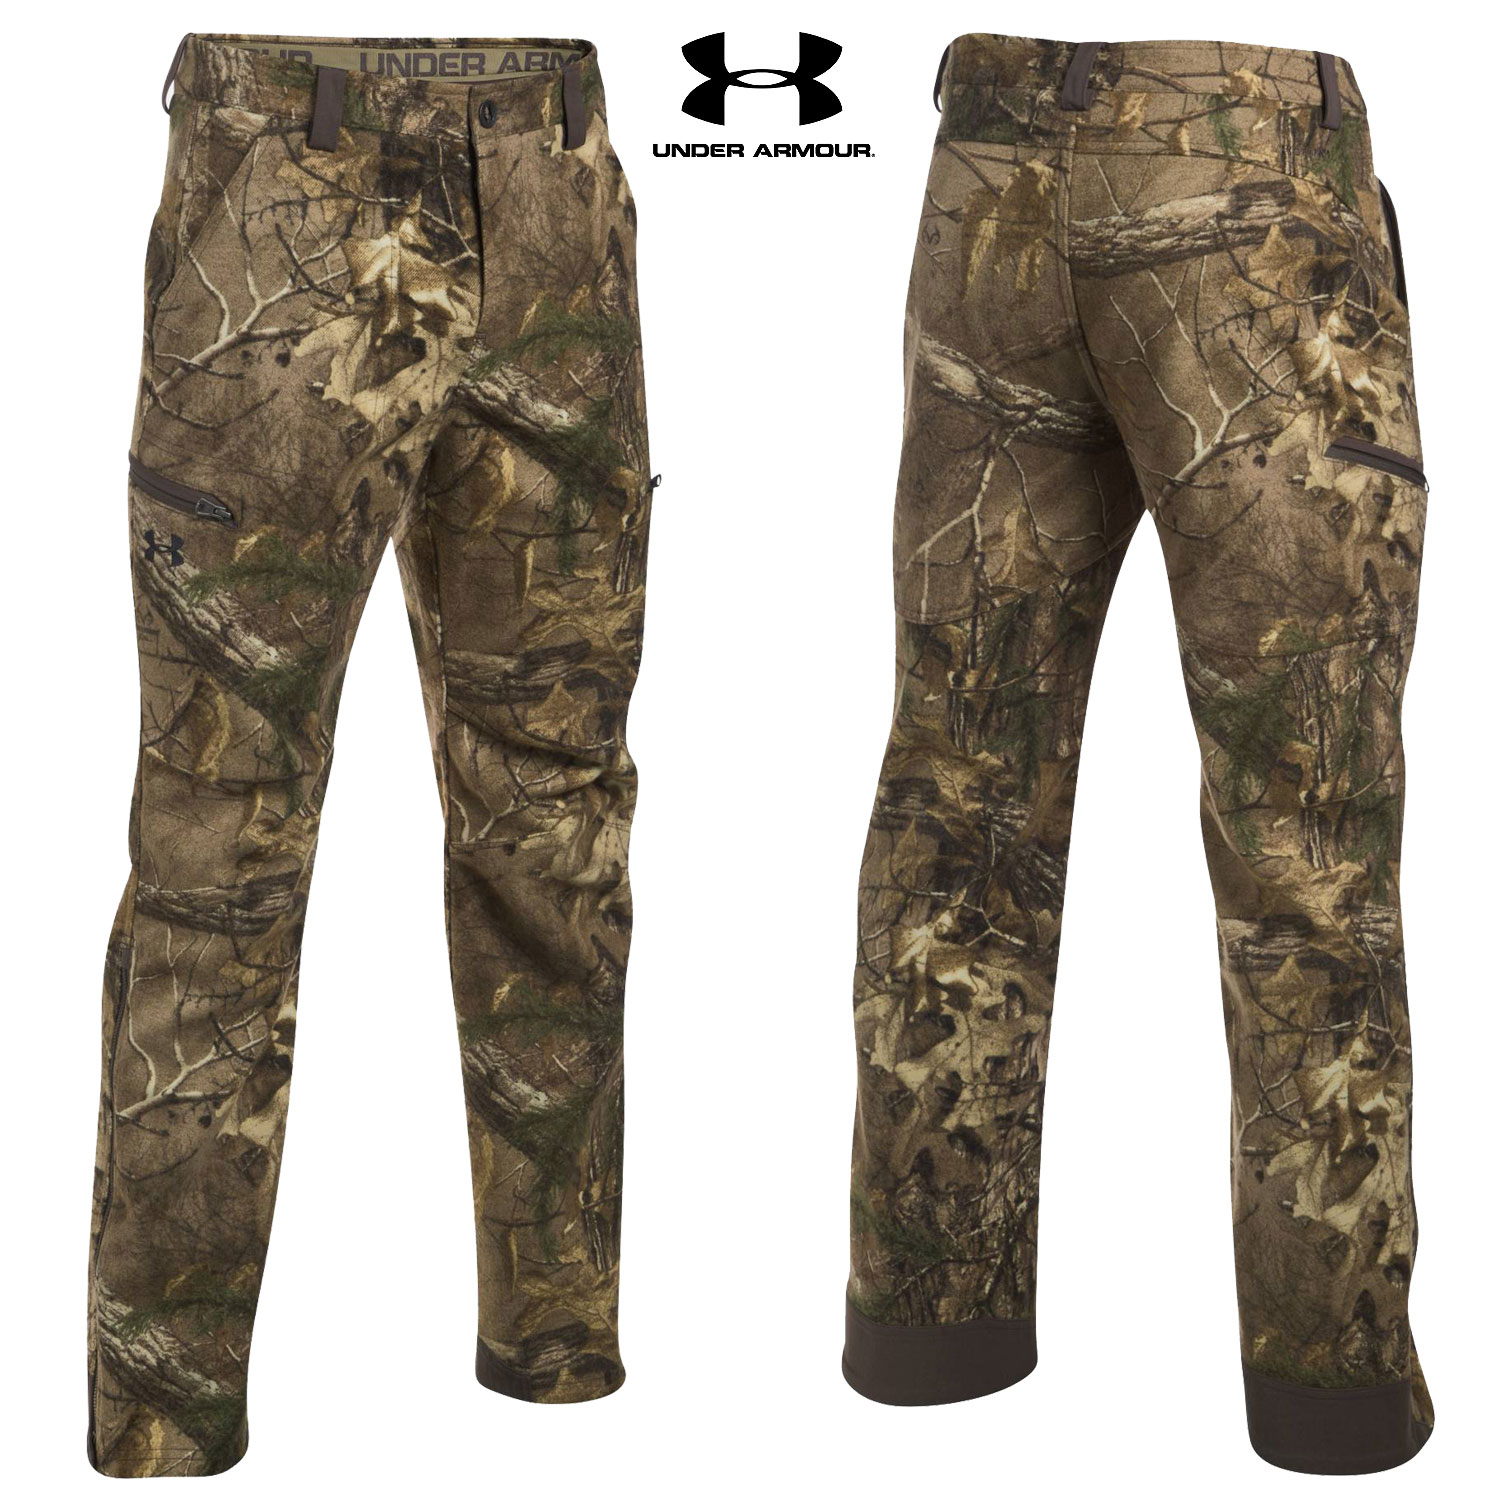 Under Armour Stealth Reaper Mid Season 